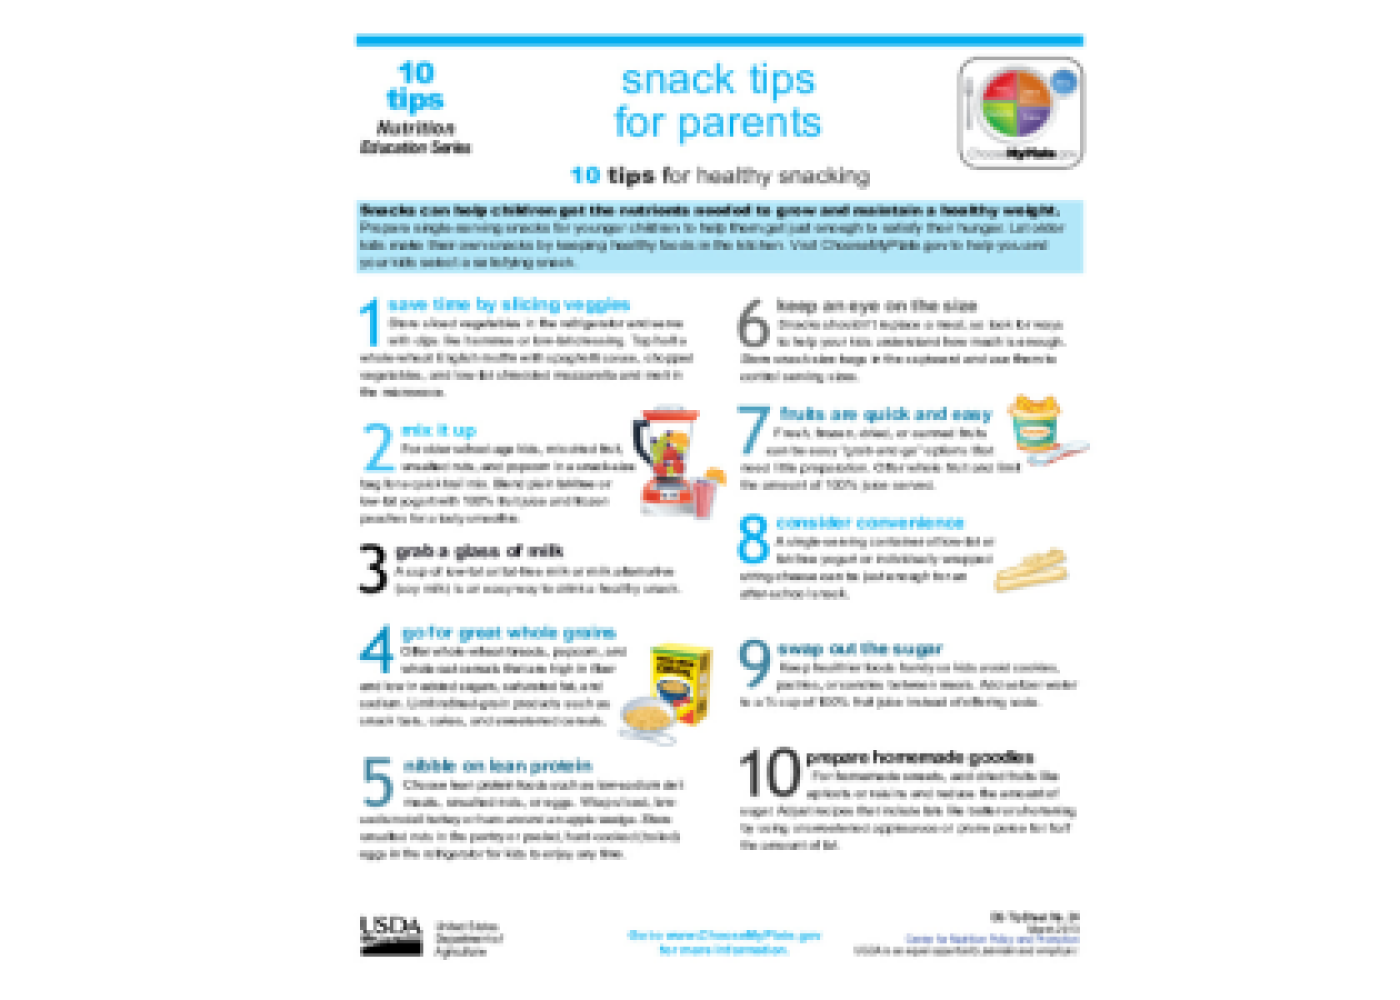 thumbnail of "Snack Tips for Parents" handout